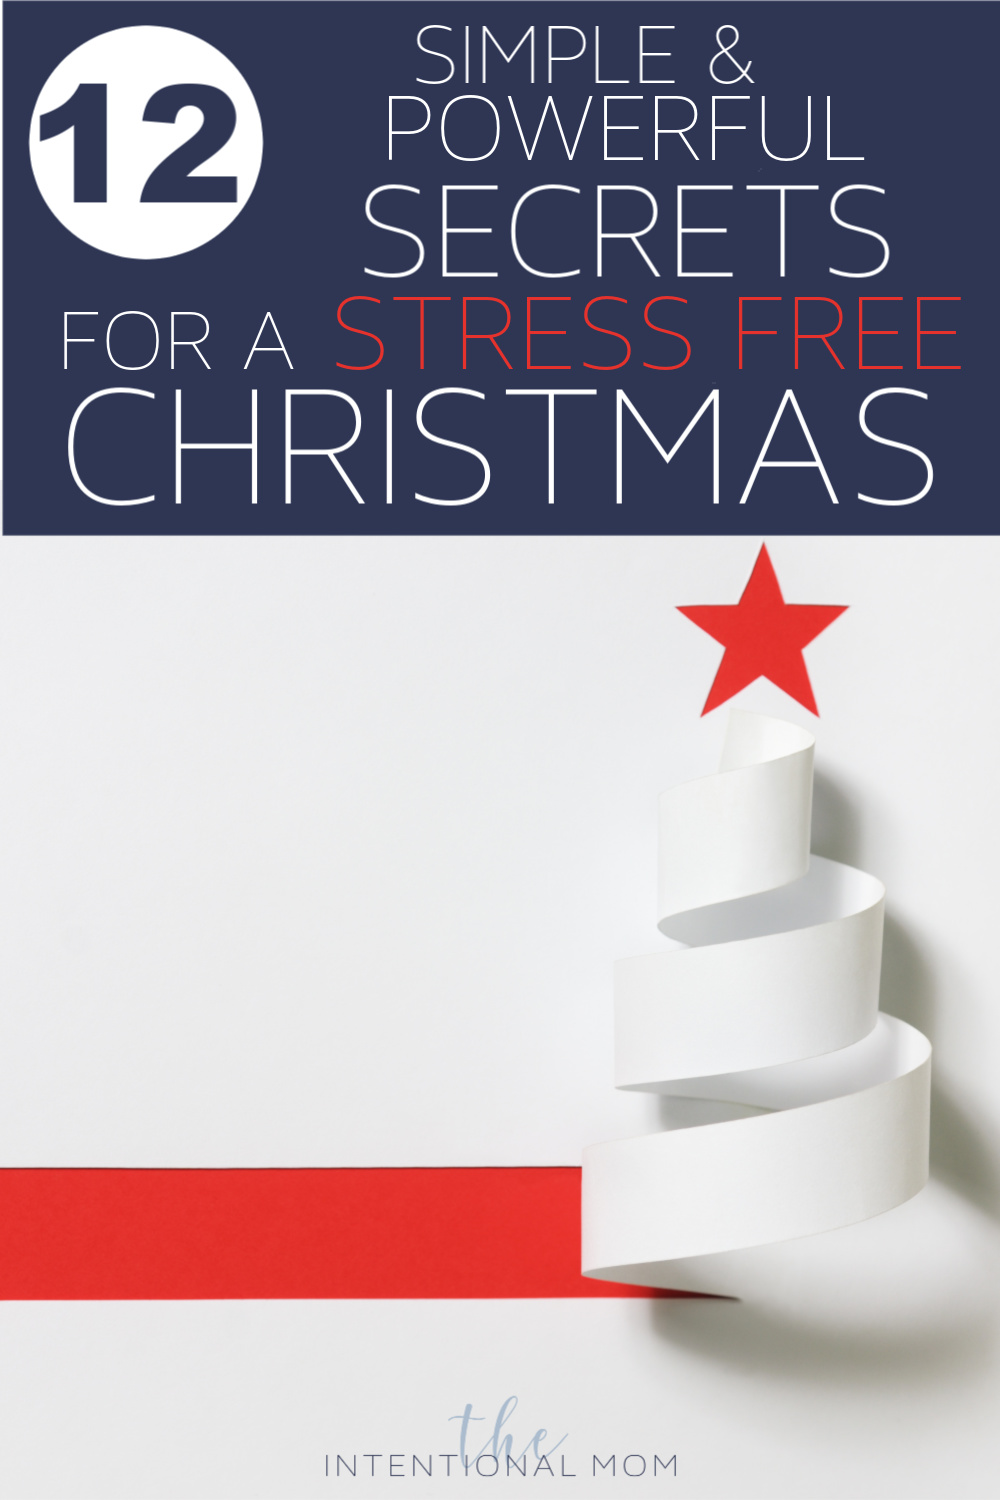 12 Simple & Powerful Secrets For a Stress Free Christmas